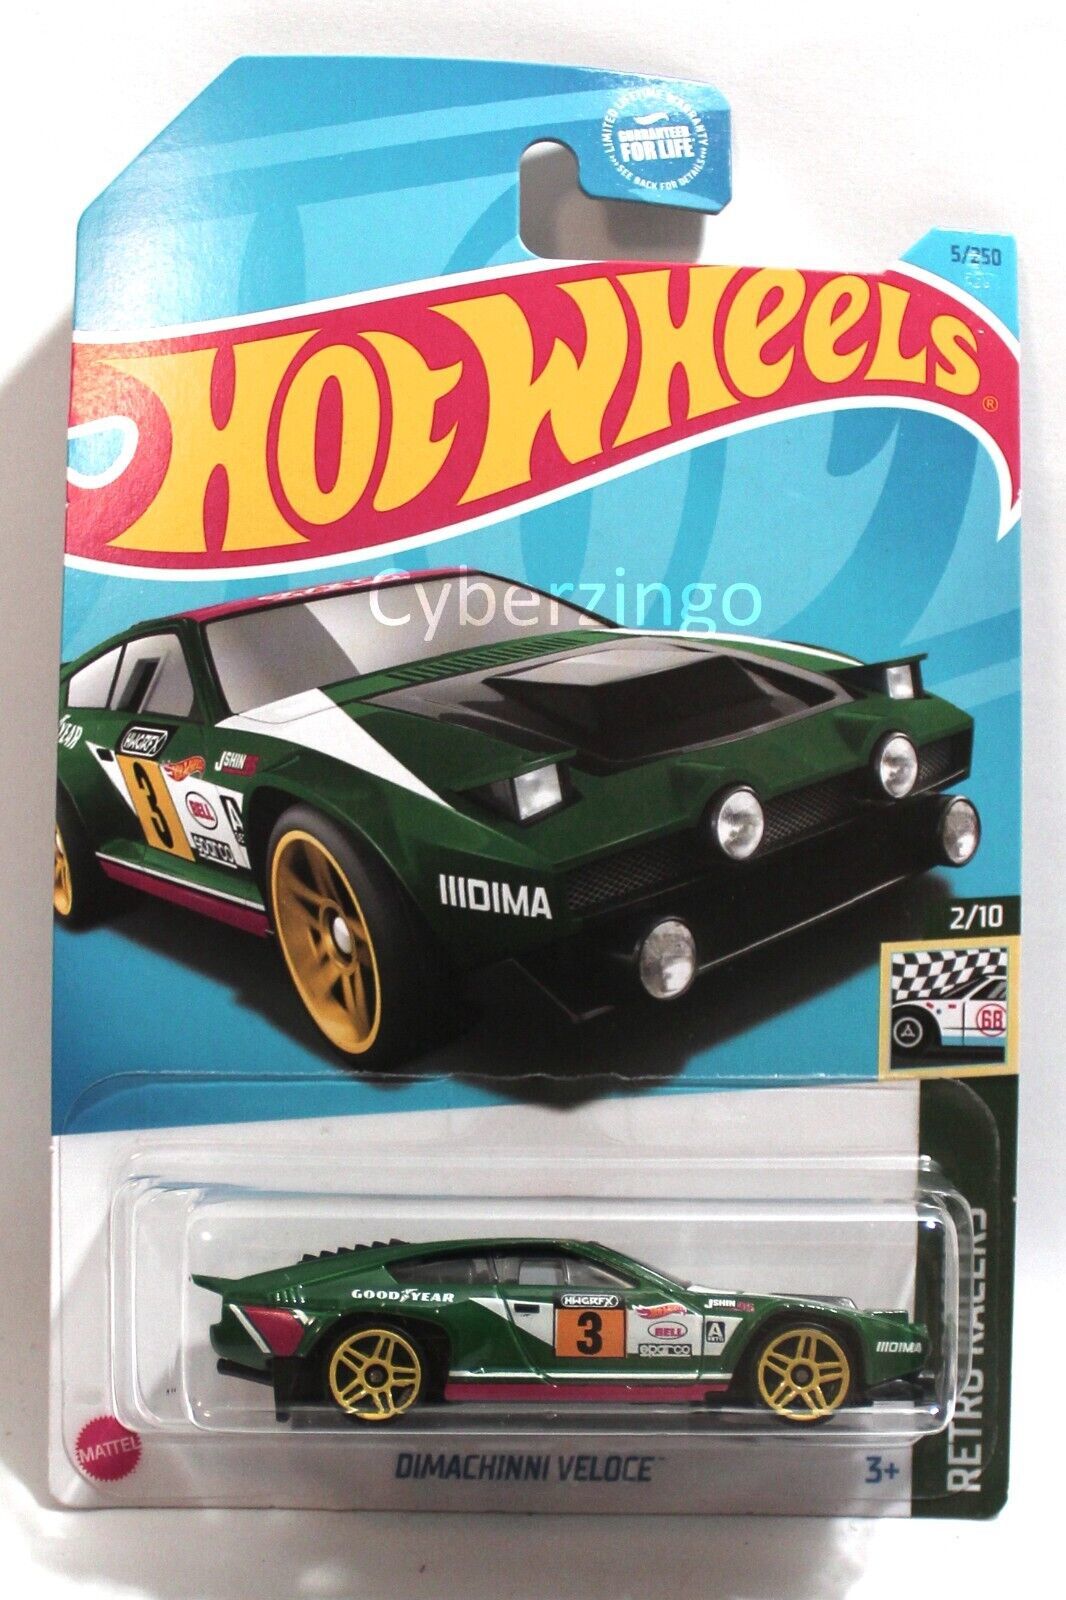 Primary image for 1:64 Hot Wheels Dimachinni Veloce Diecast Model Car Green BRAND NEW